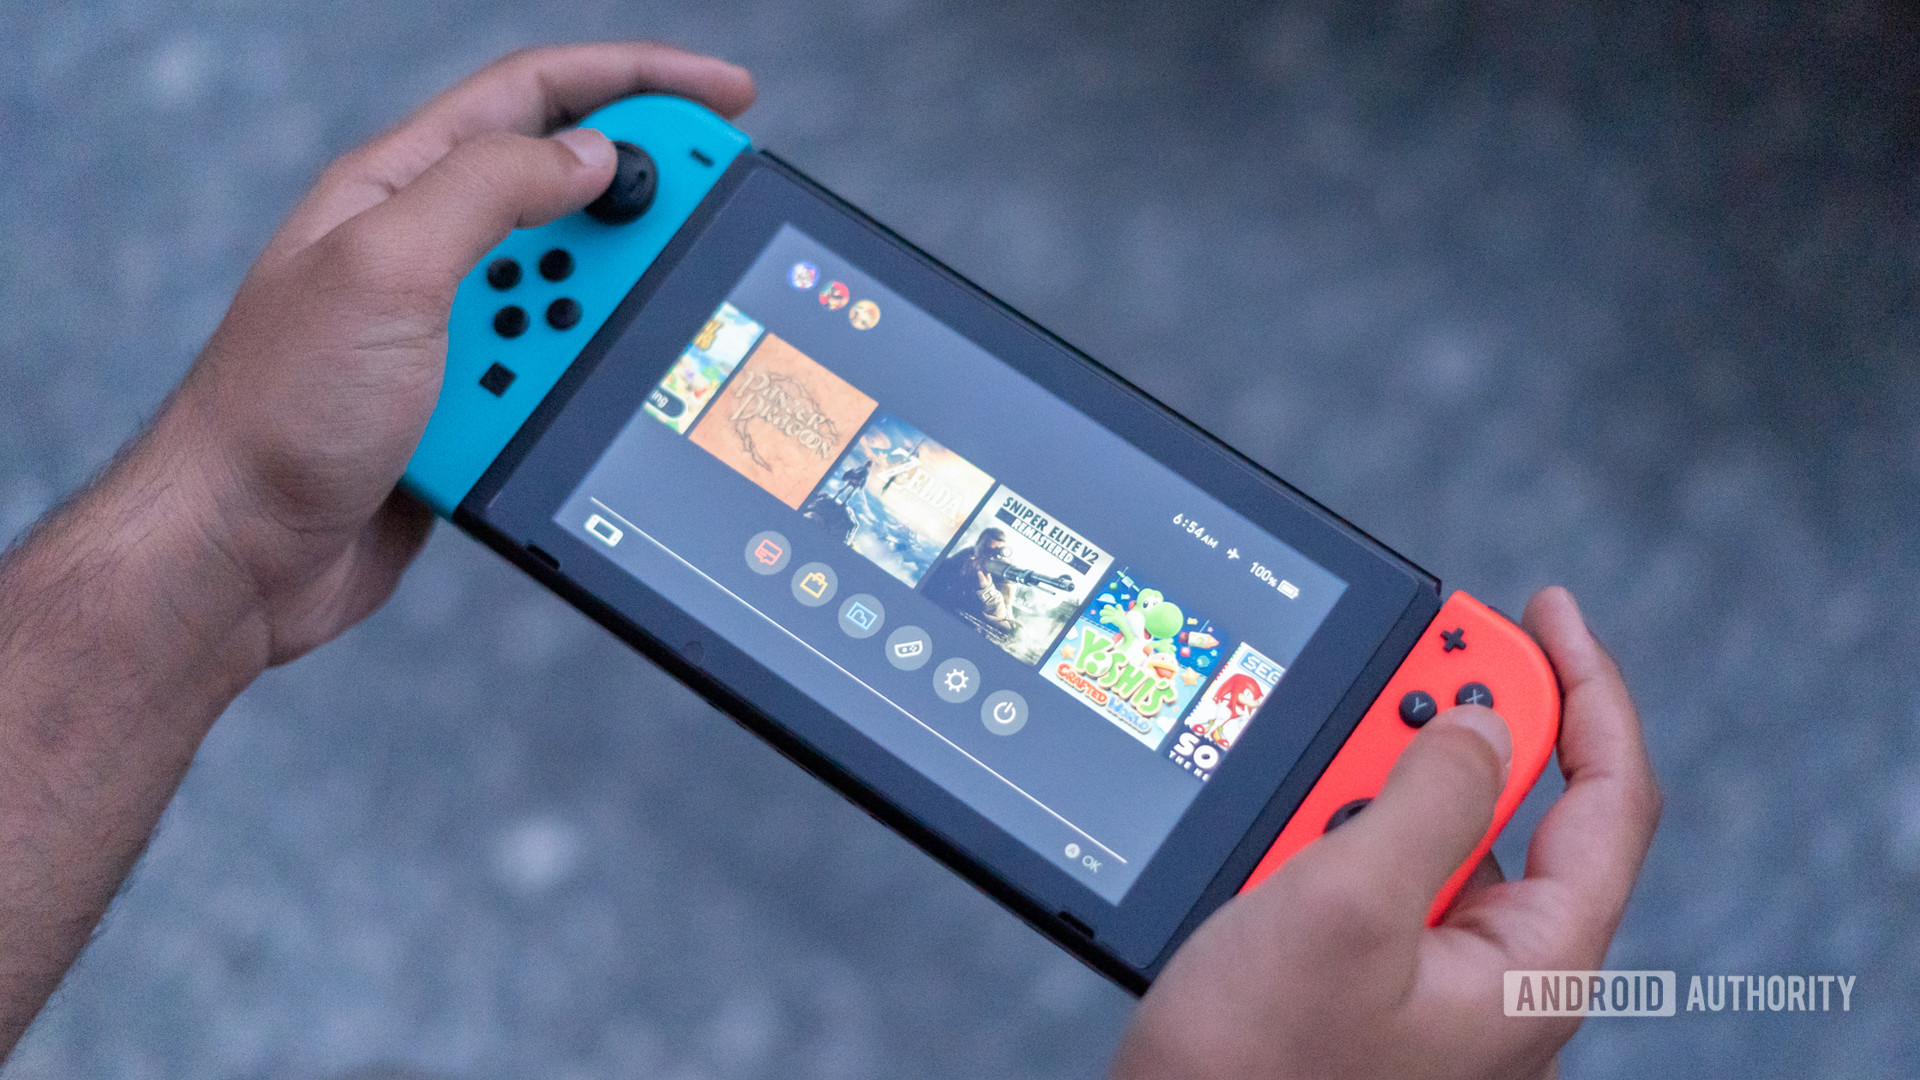 Hands holding a Nintendo Switch console.